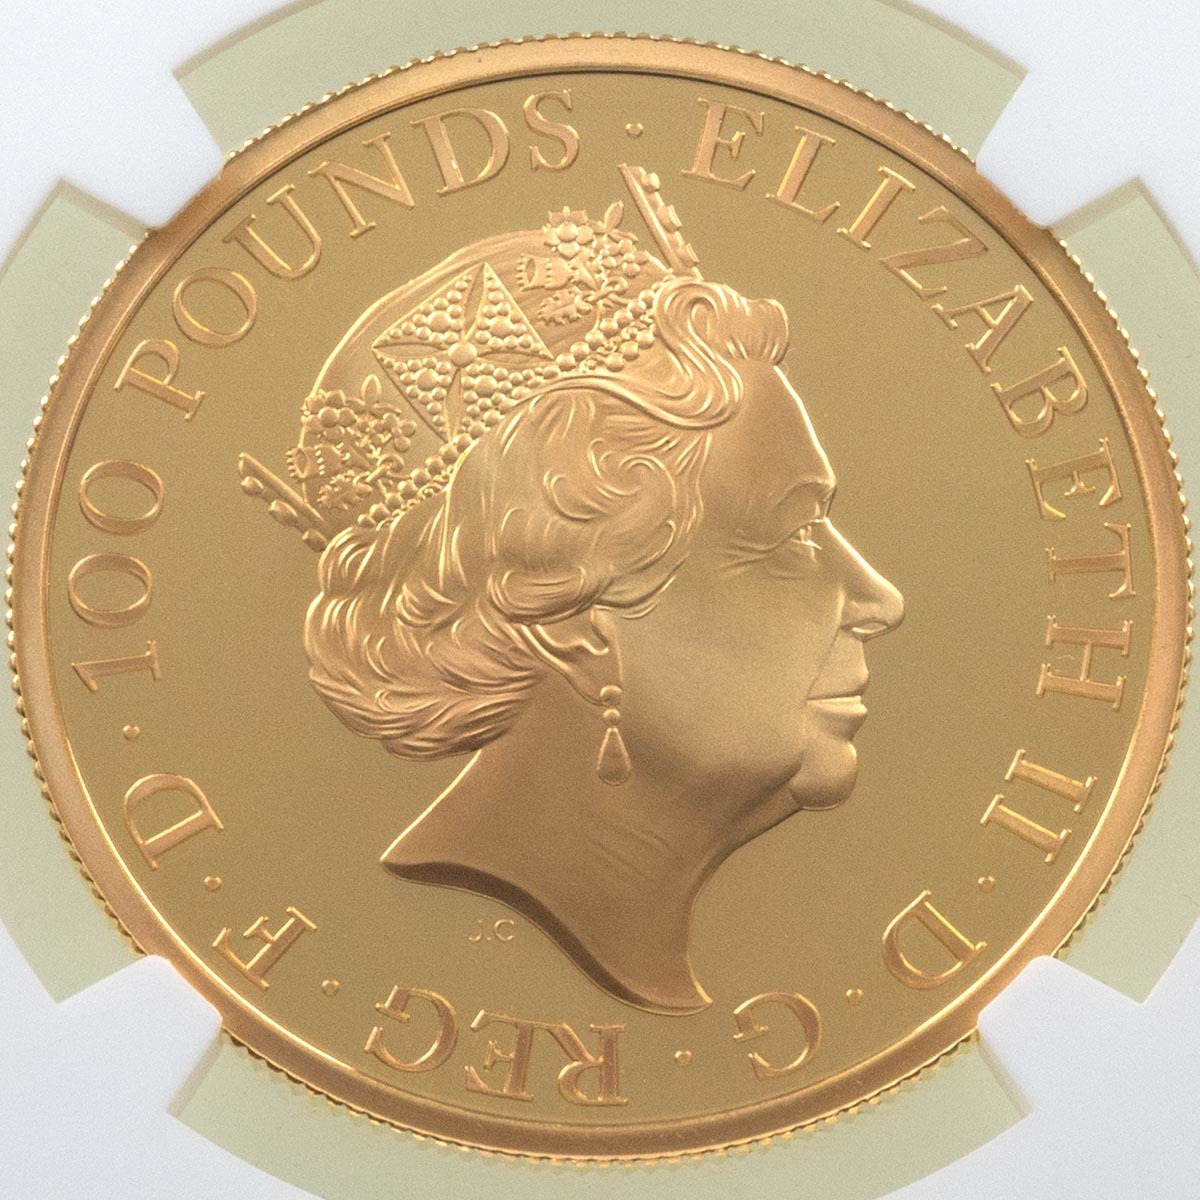 UK17QUGP 2017 Queen's Beasts Unicorn Of Scotland One Ounce Gold Proof Coin NGC Graded PF 69 Ultra Cameo Obverse